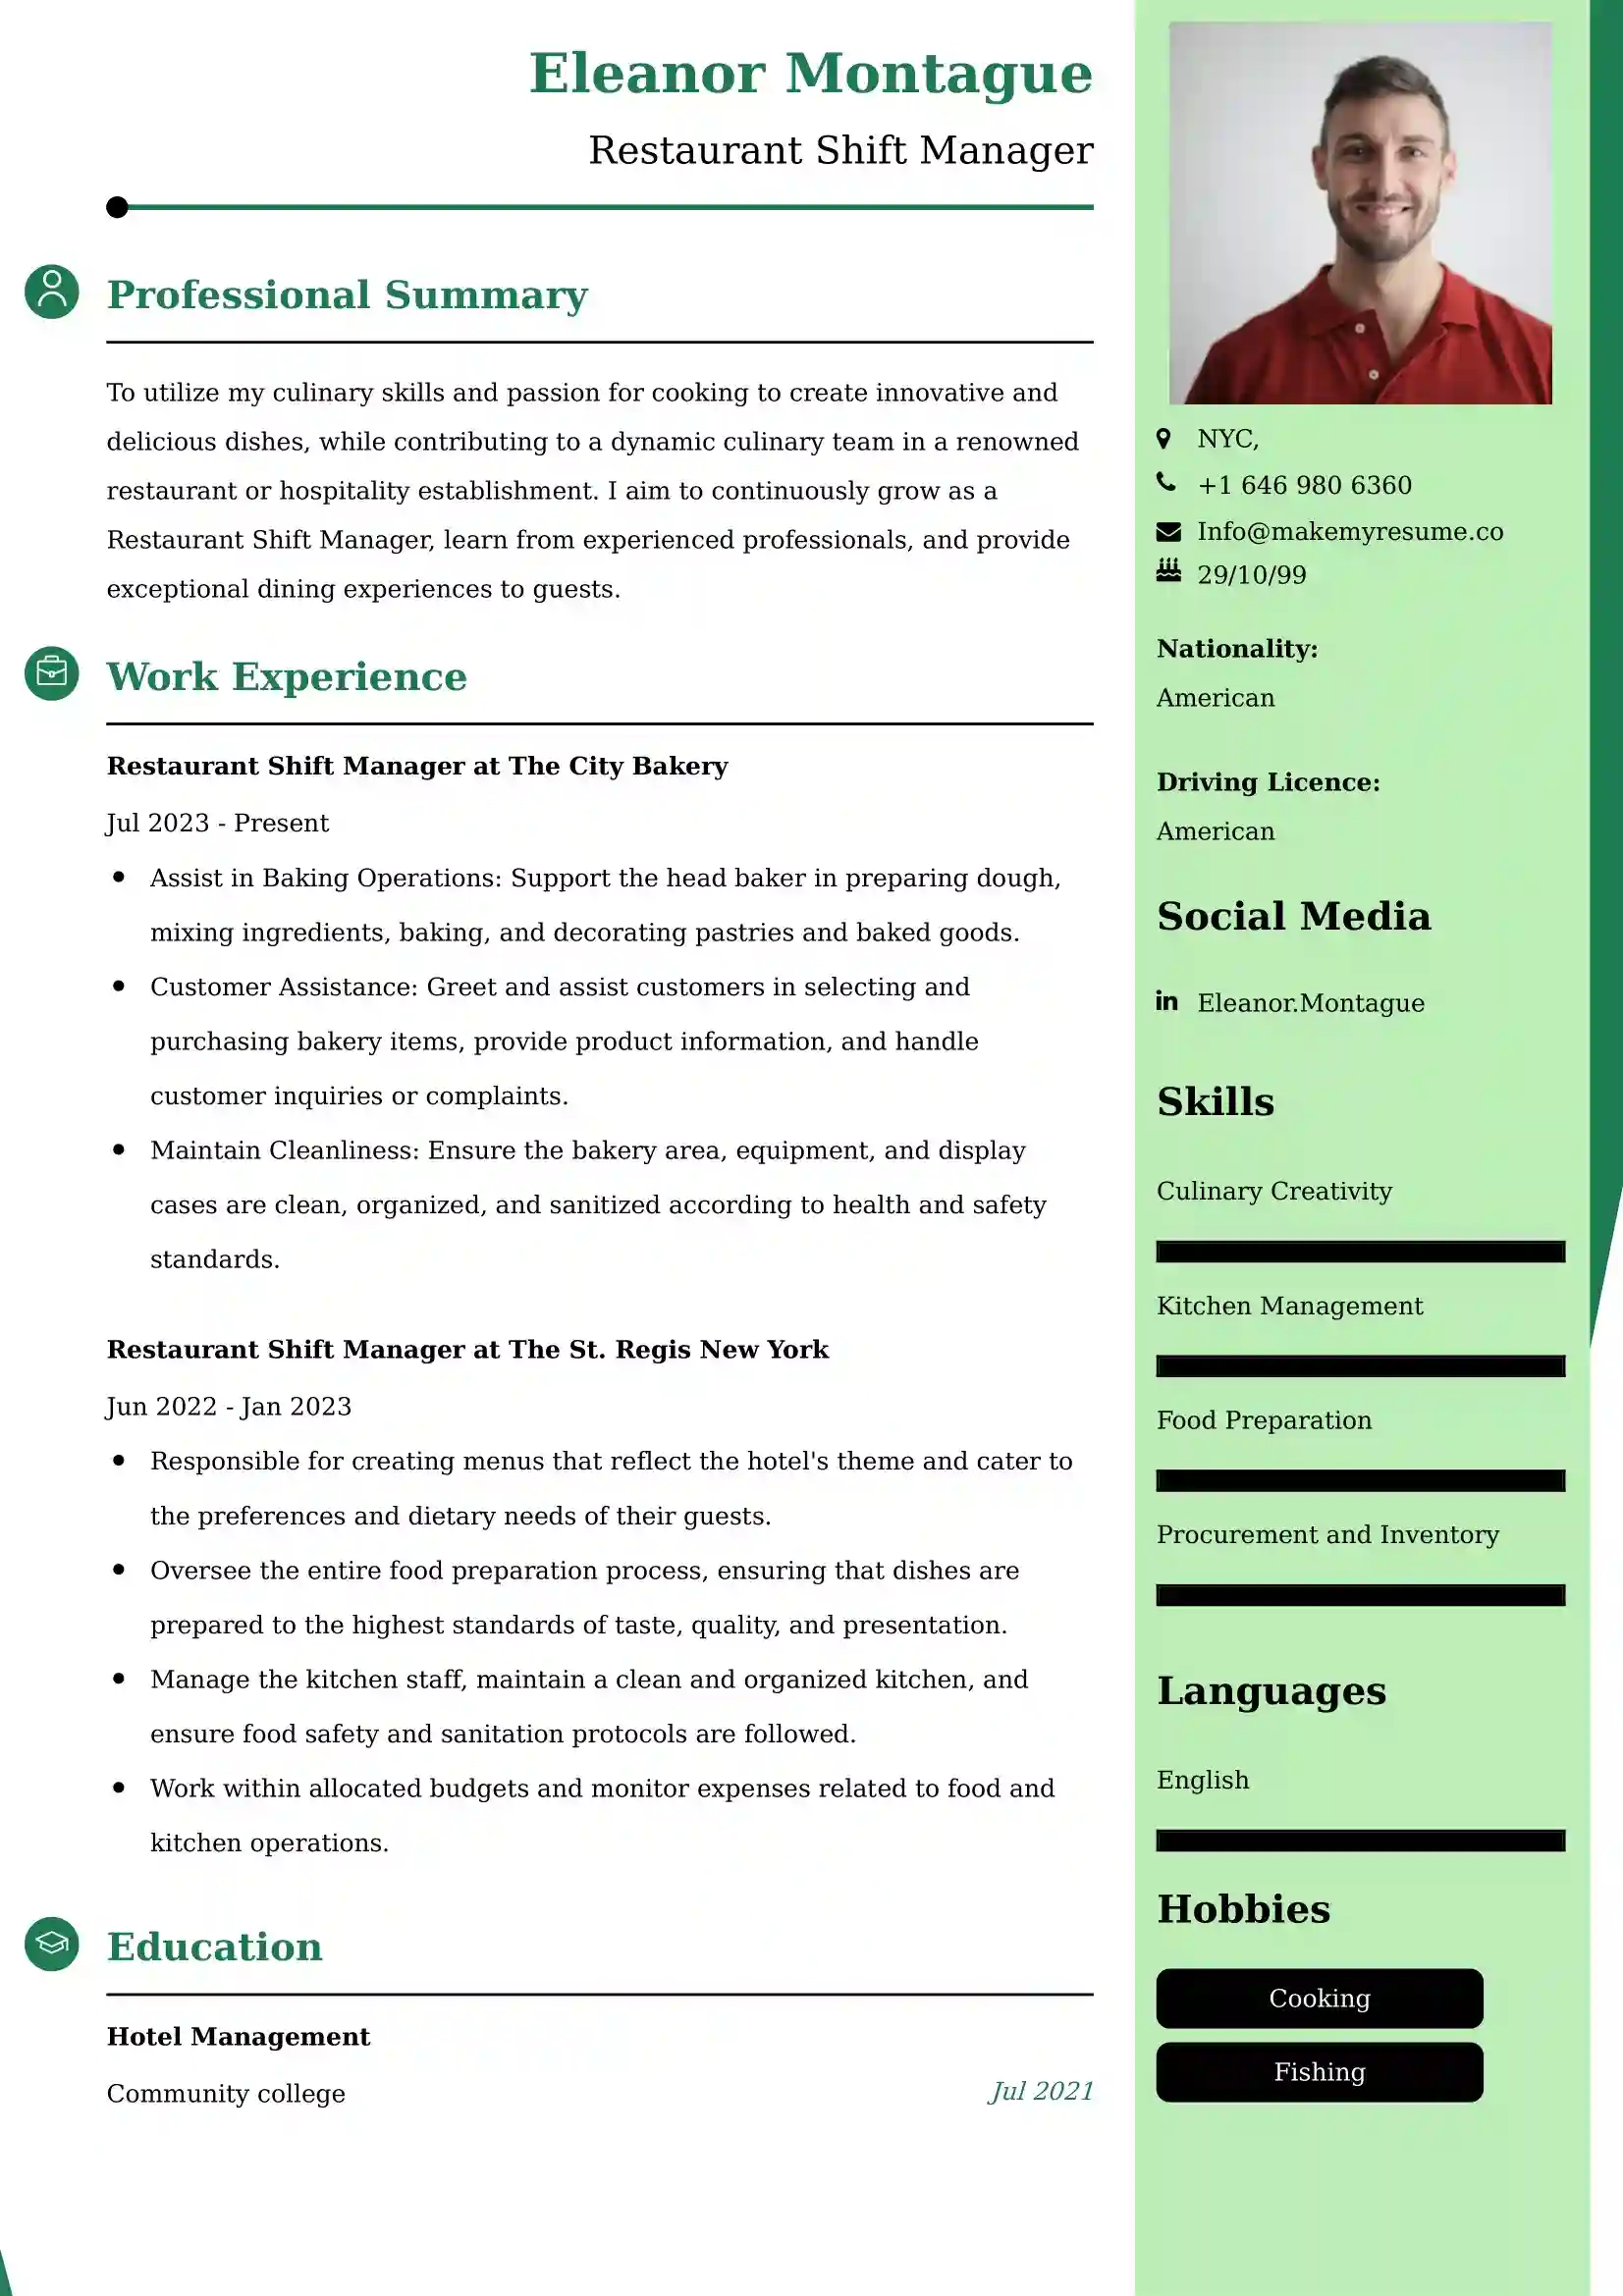 Restaurant Shift Manager Resume Examples - Brazilian Format, Latest Template